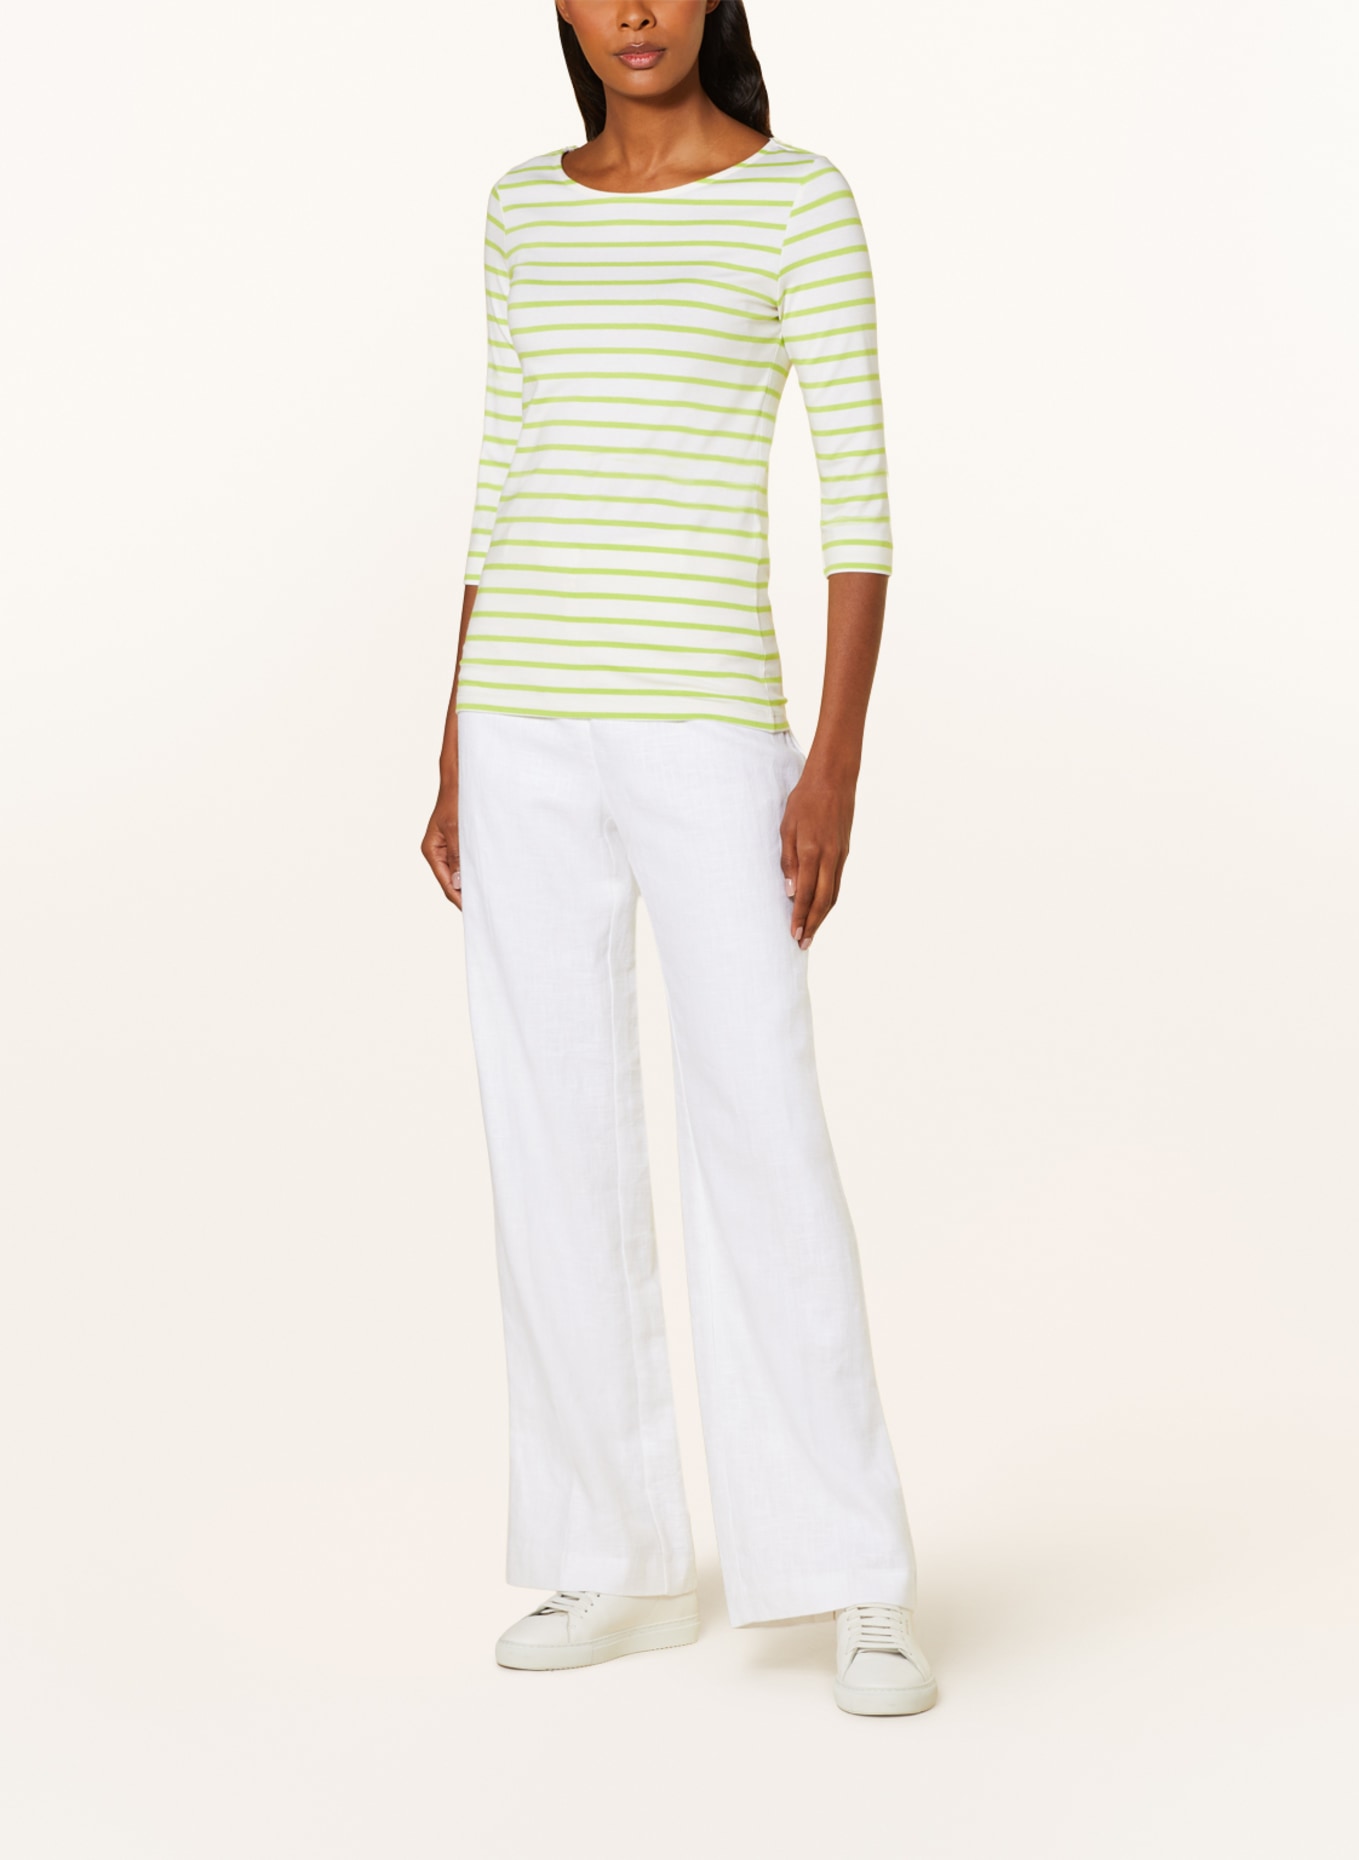 darling harbour Shirt with 3/4 sleeves, Color: WEISS/LIMETTENGRÜN (Image 2)